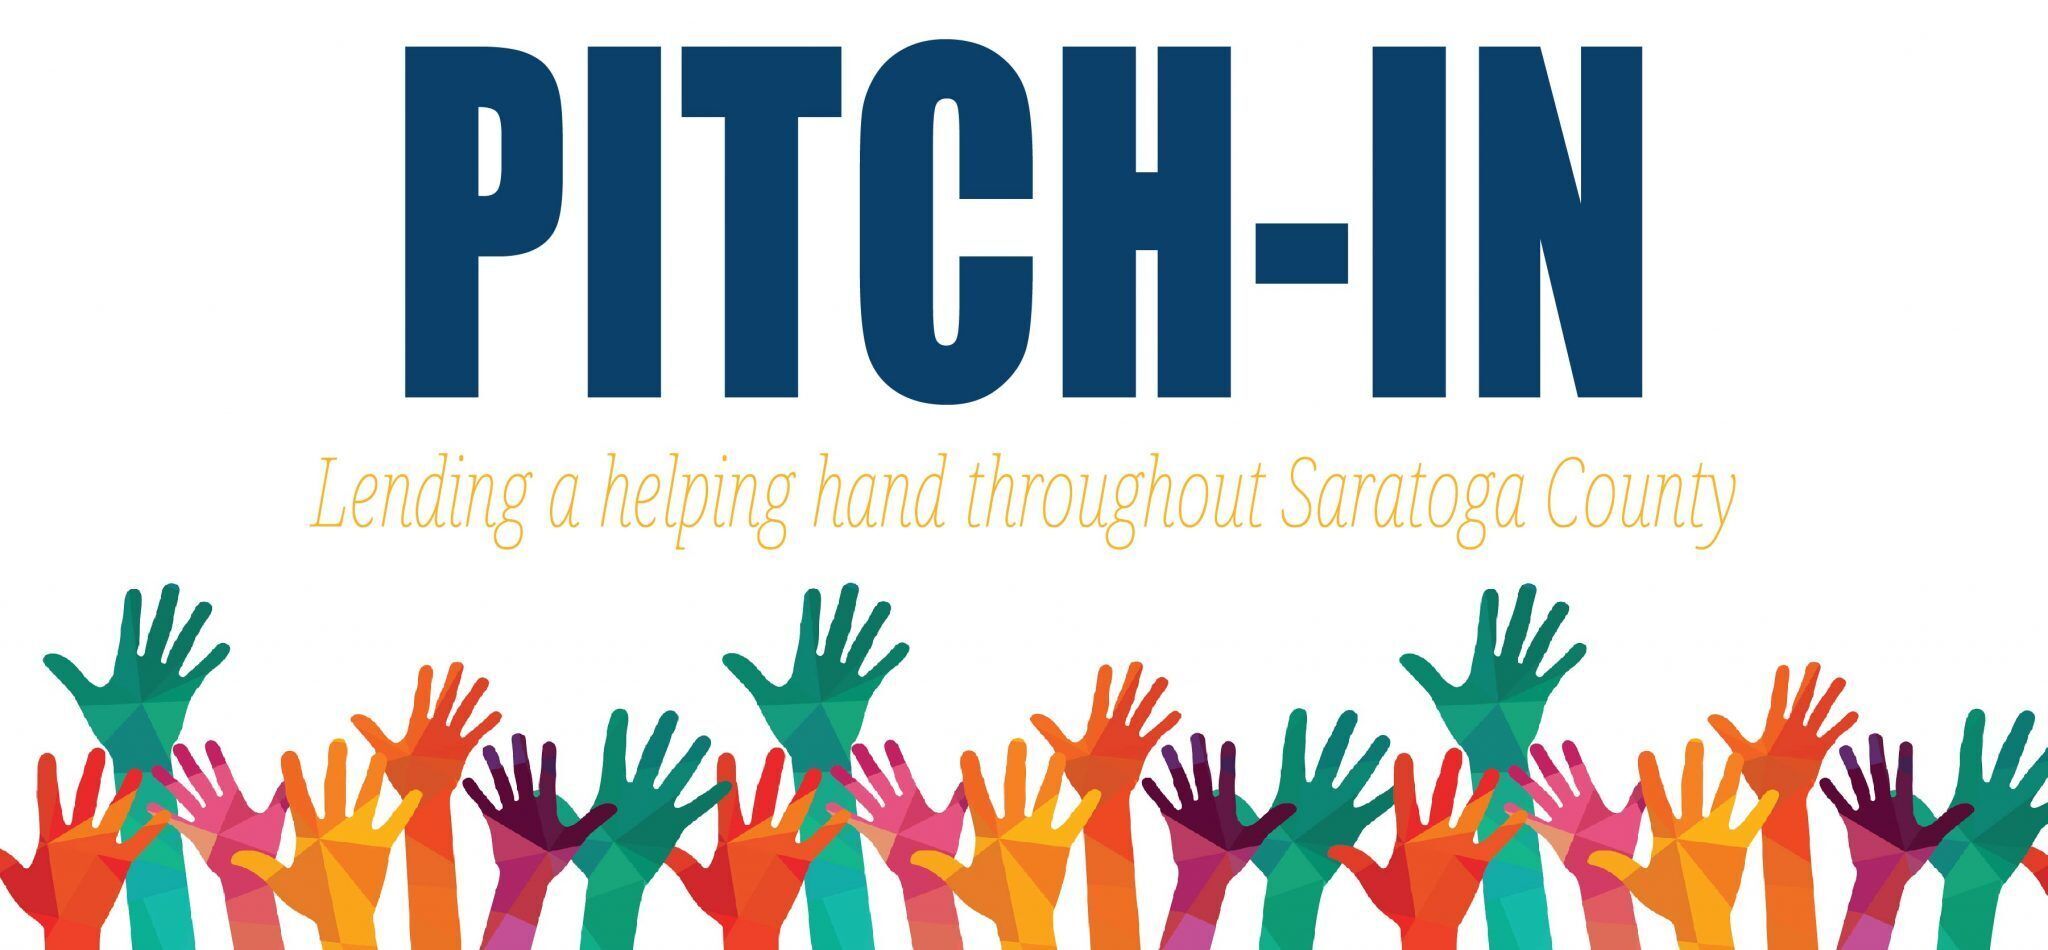 Saratogian: First-ever Pitch-In event to boost volunteerism throughout Saratoga County